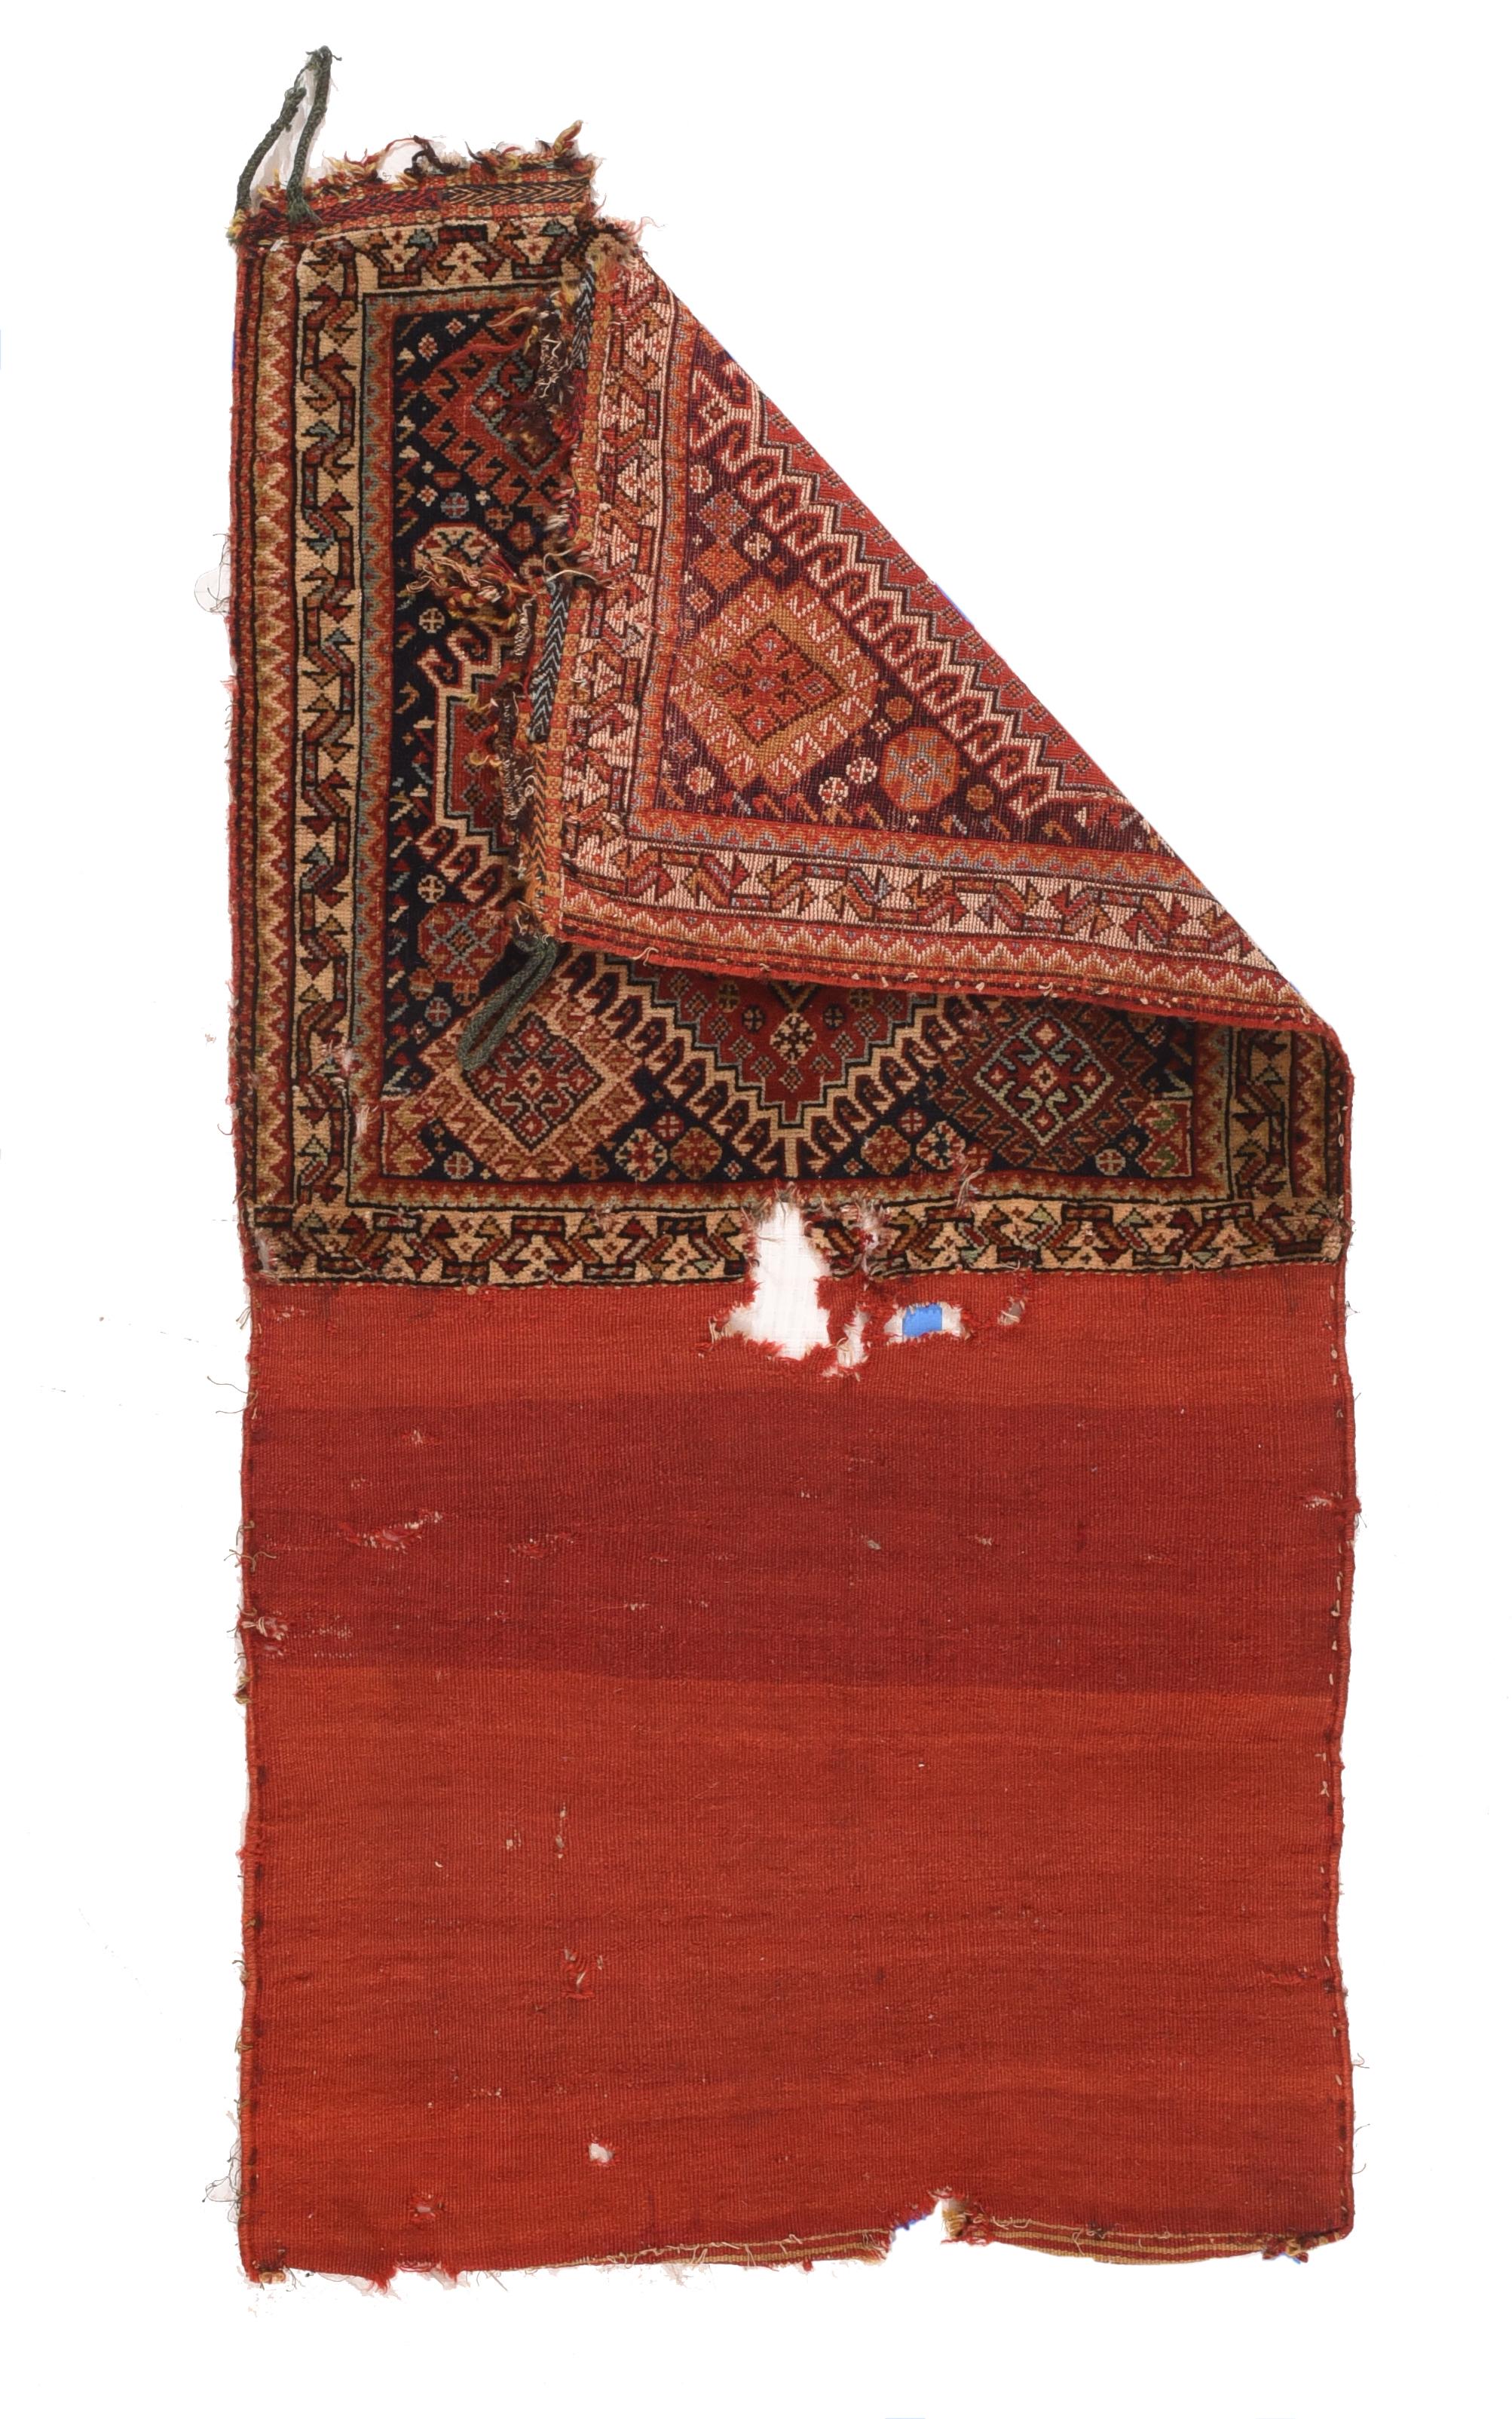 Antique Qashqai Back Face 2'2'' x 4'4''. Although in rough condition, this well-woven SW Persian tribal artefact shows the iconic stepped, hooked red octagonal medallion with an ivory rosette volute central knot and four straw lozenges in the